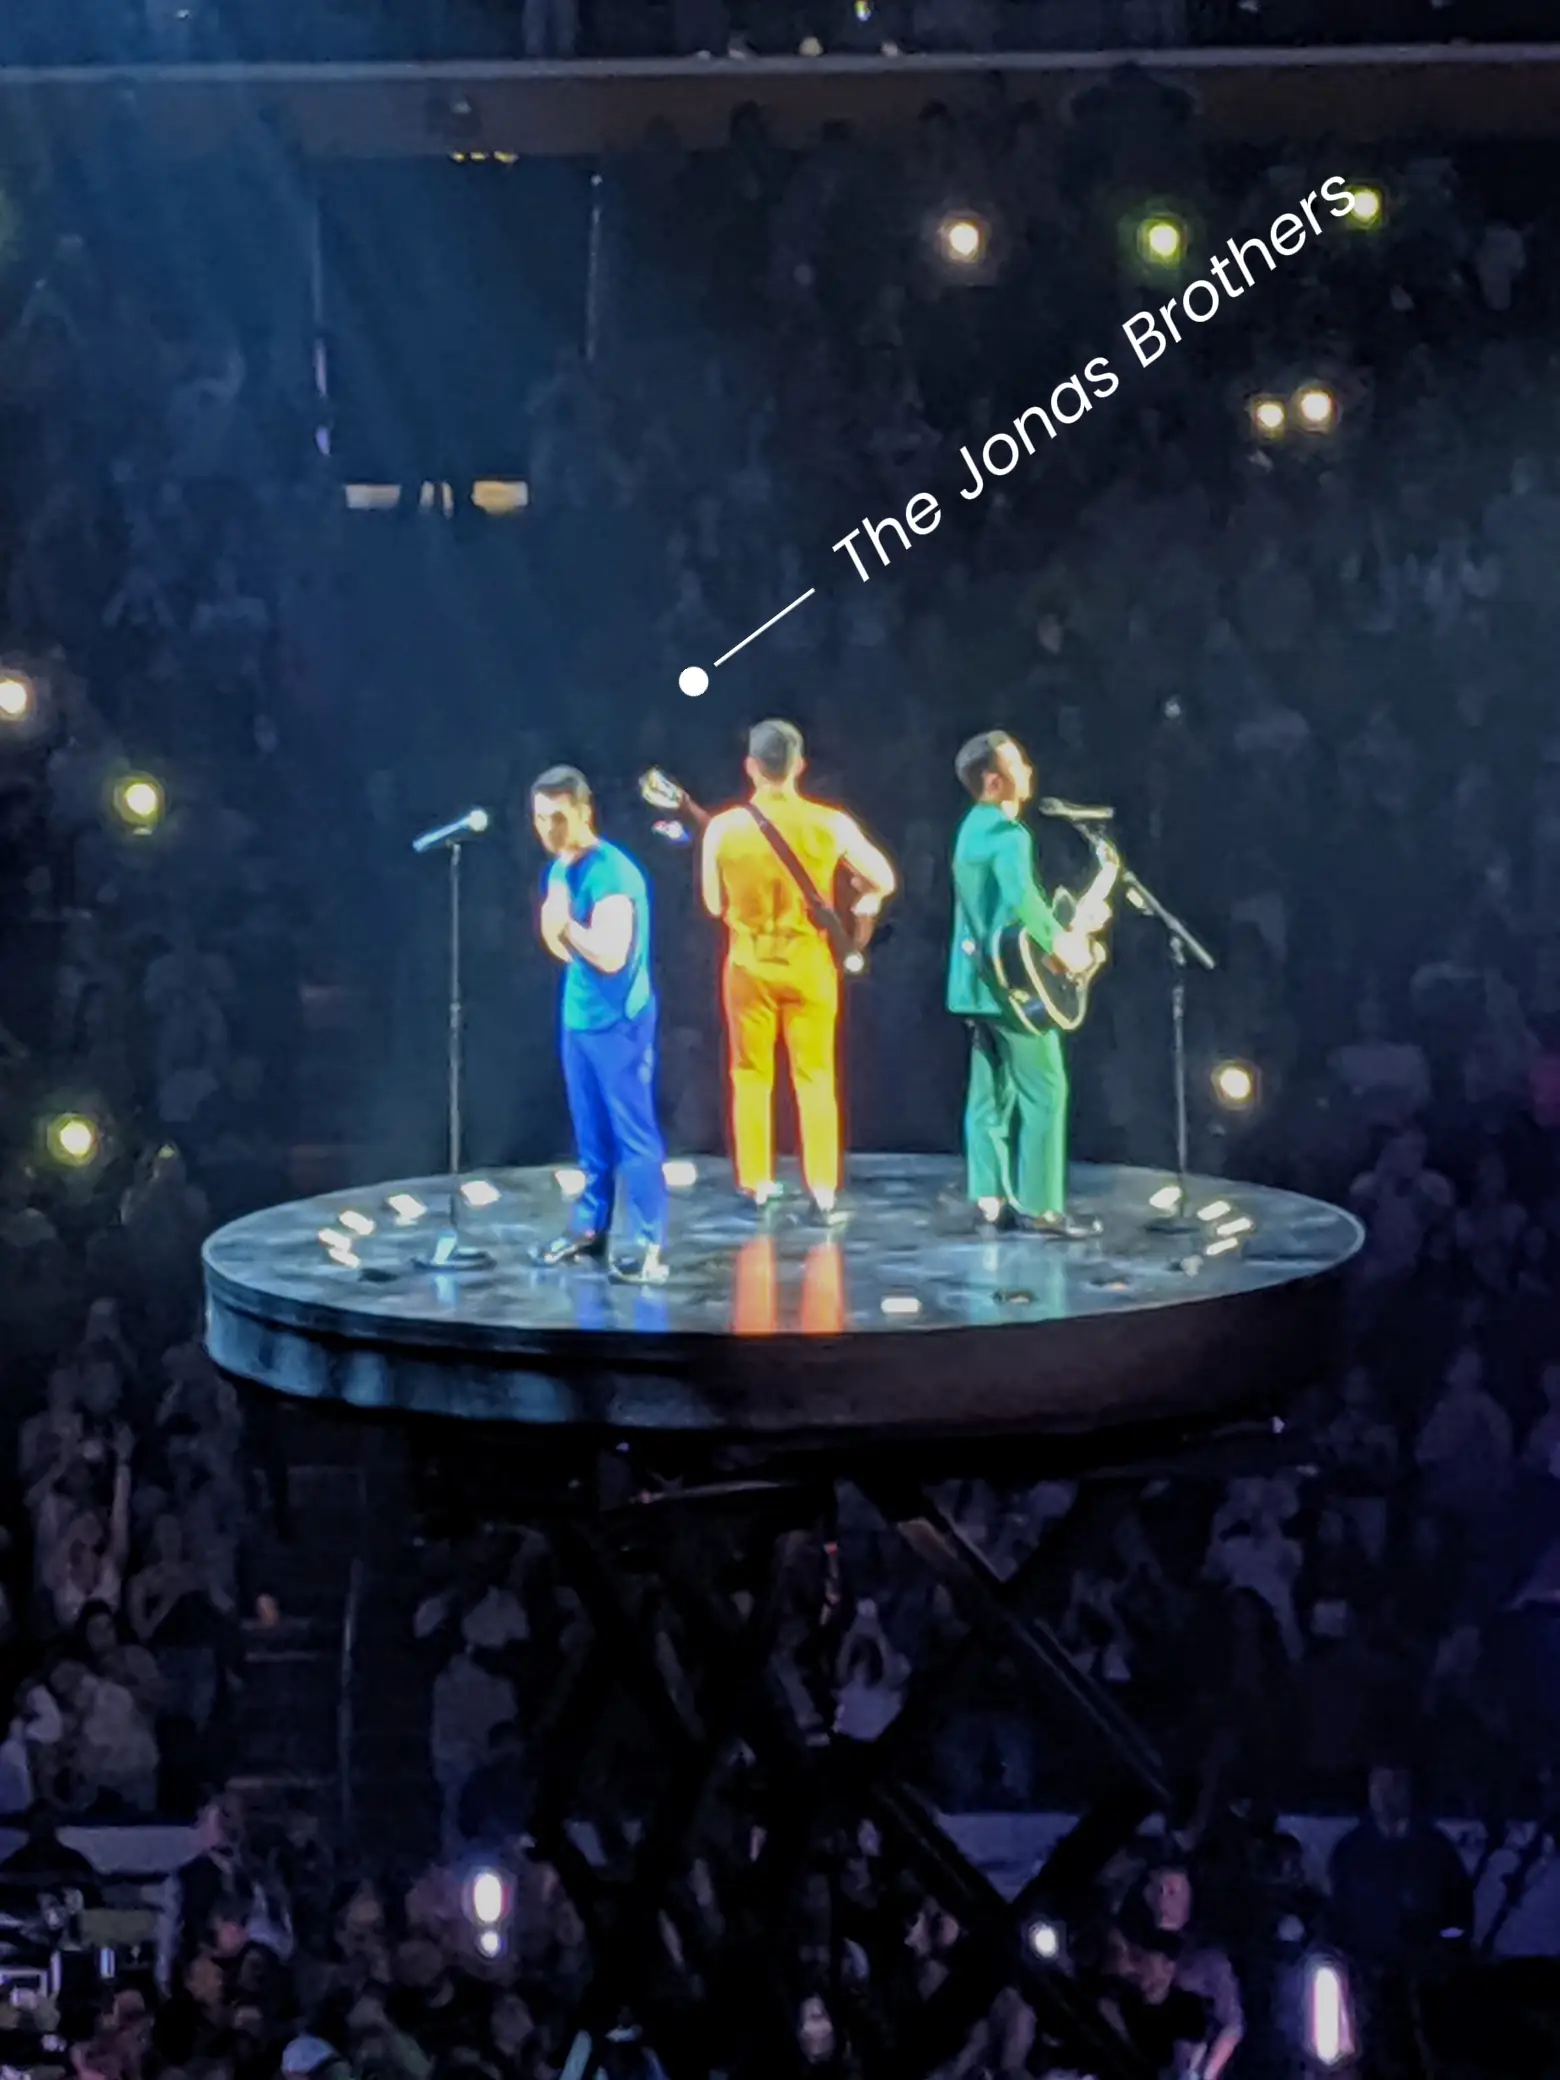  A group of men in blue performing on stage.